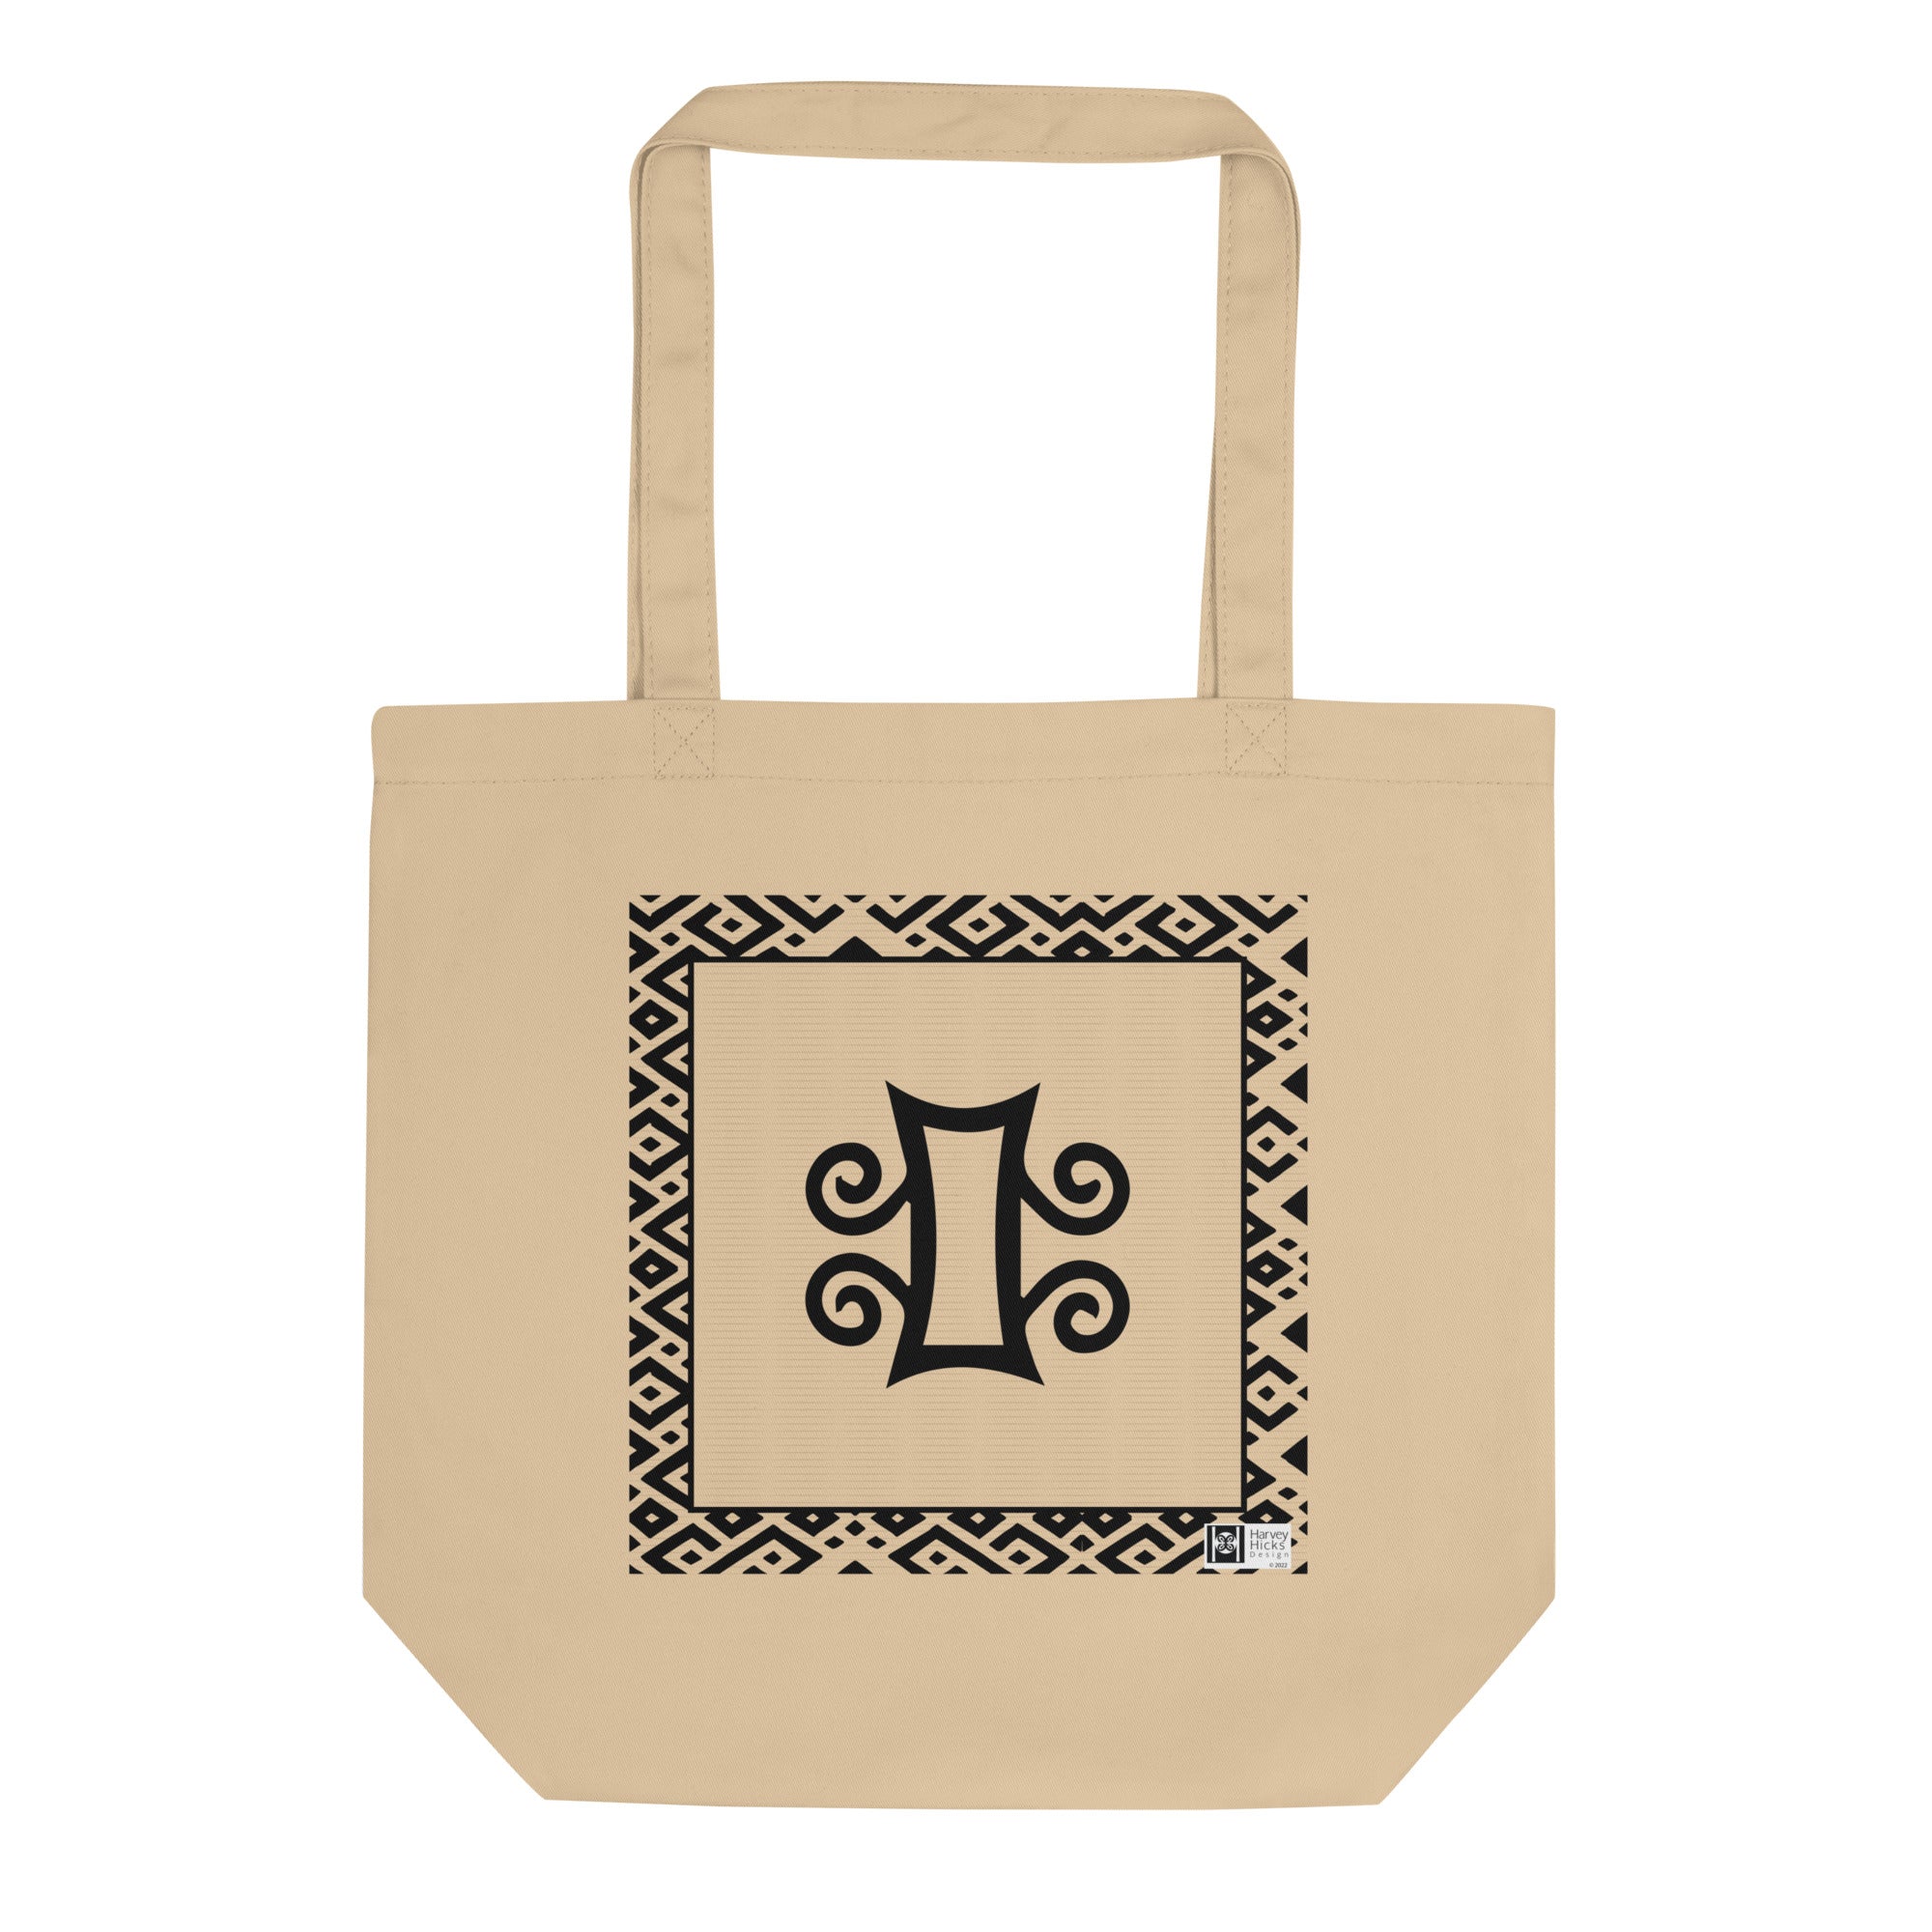 100% cotton Eco Tote Bag, featuring the Adinkra symbol for ill will, NO TEXT